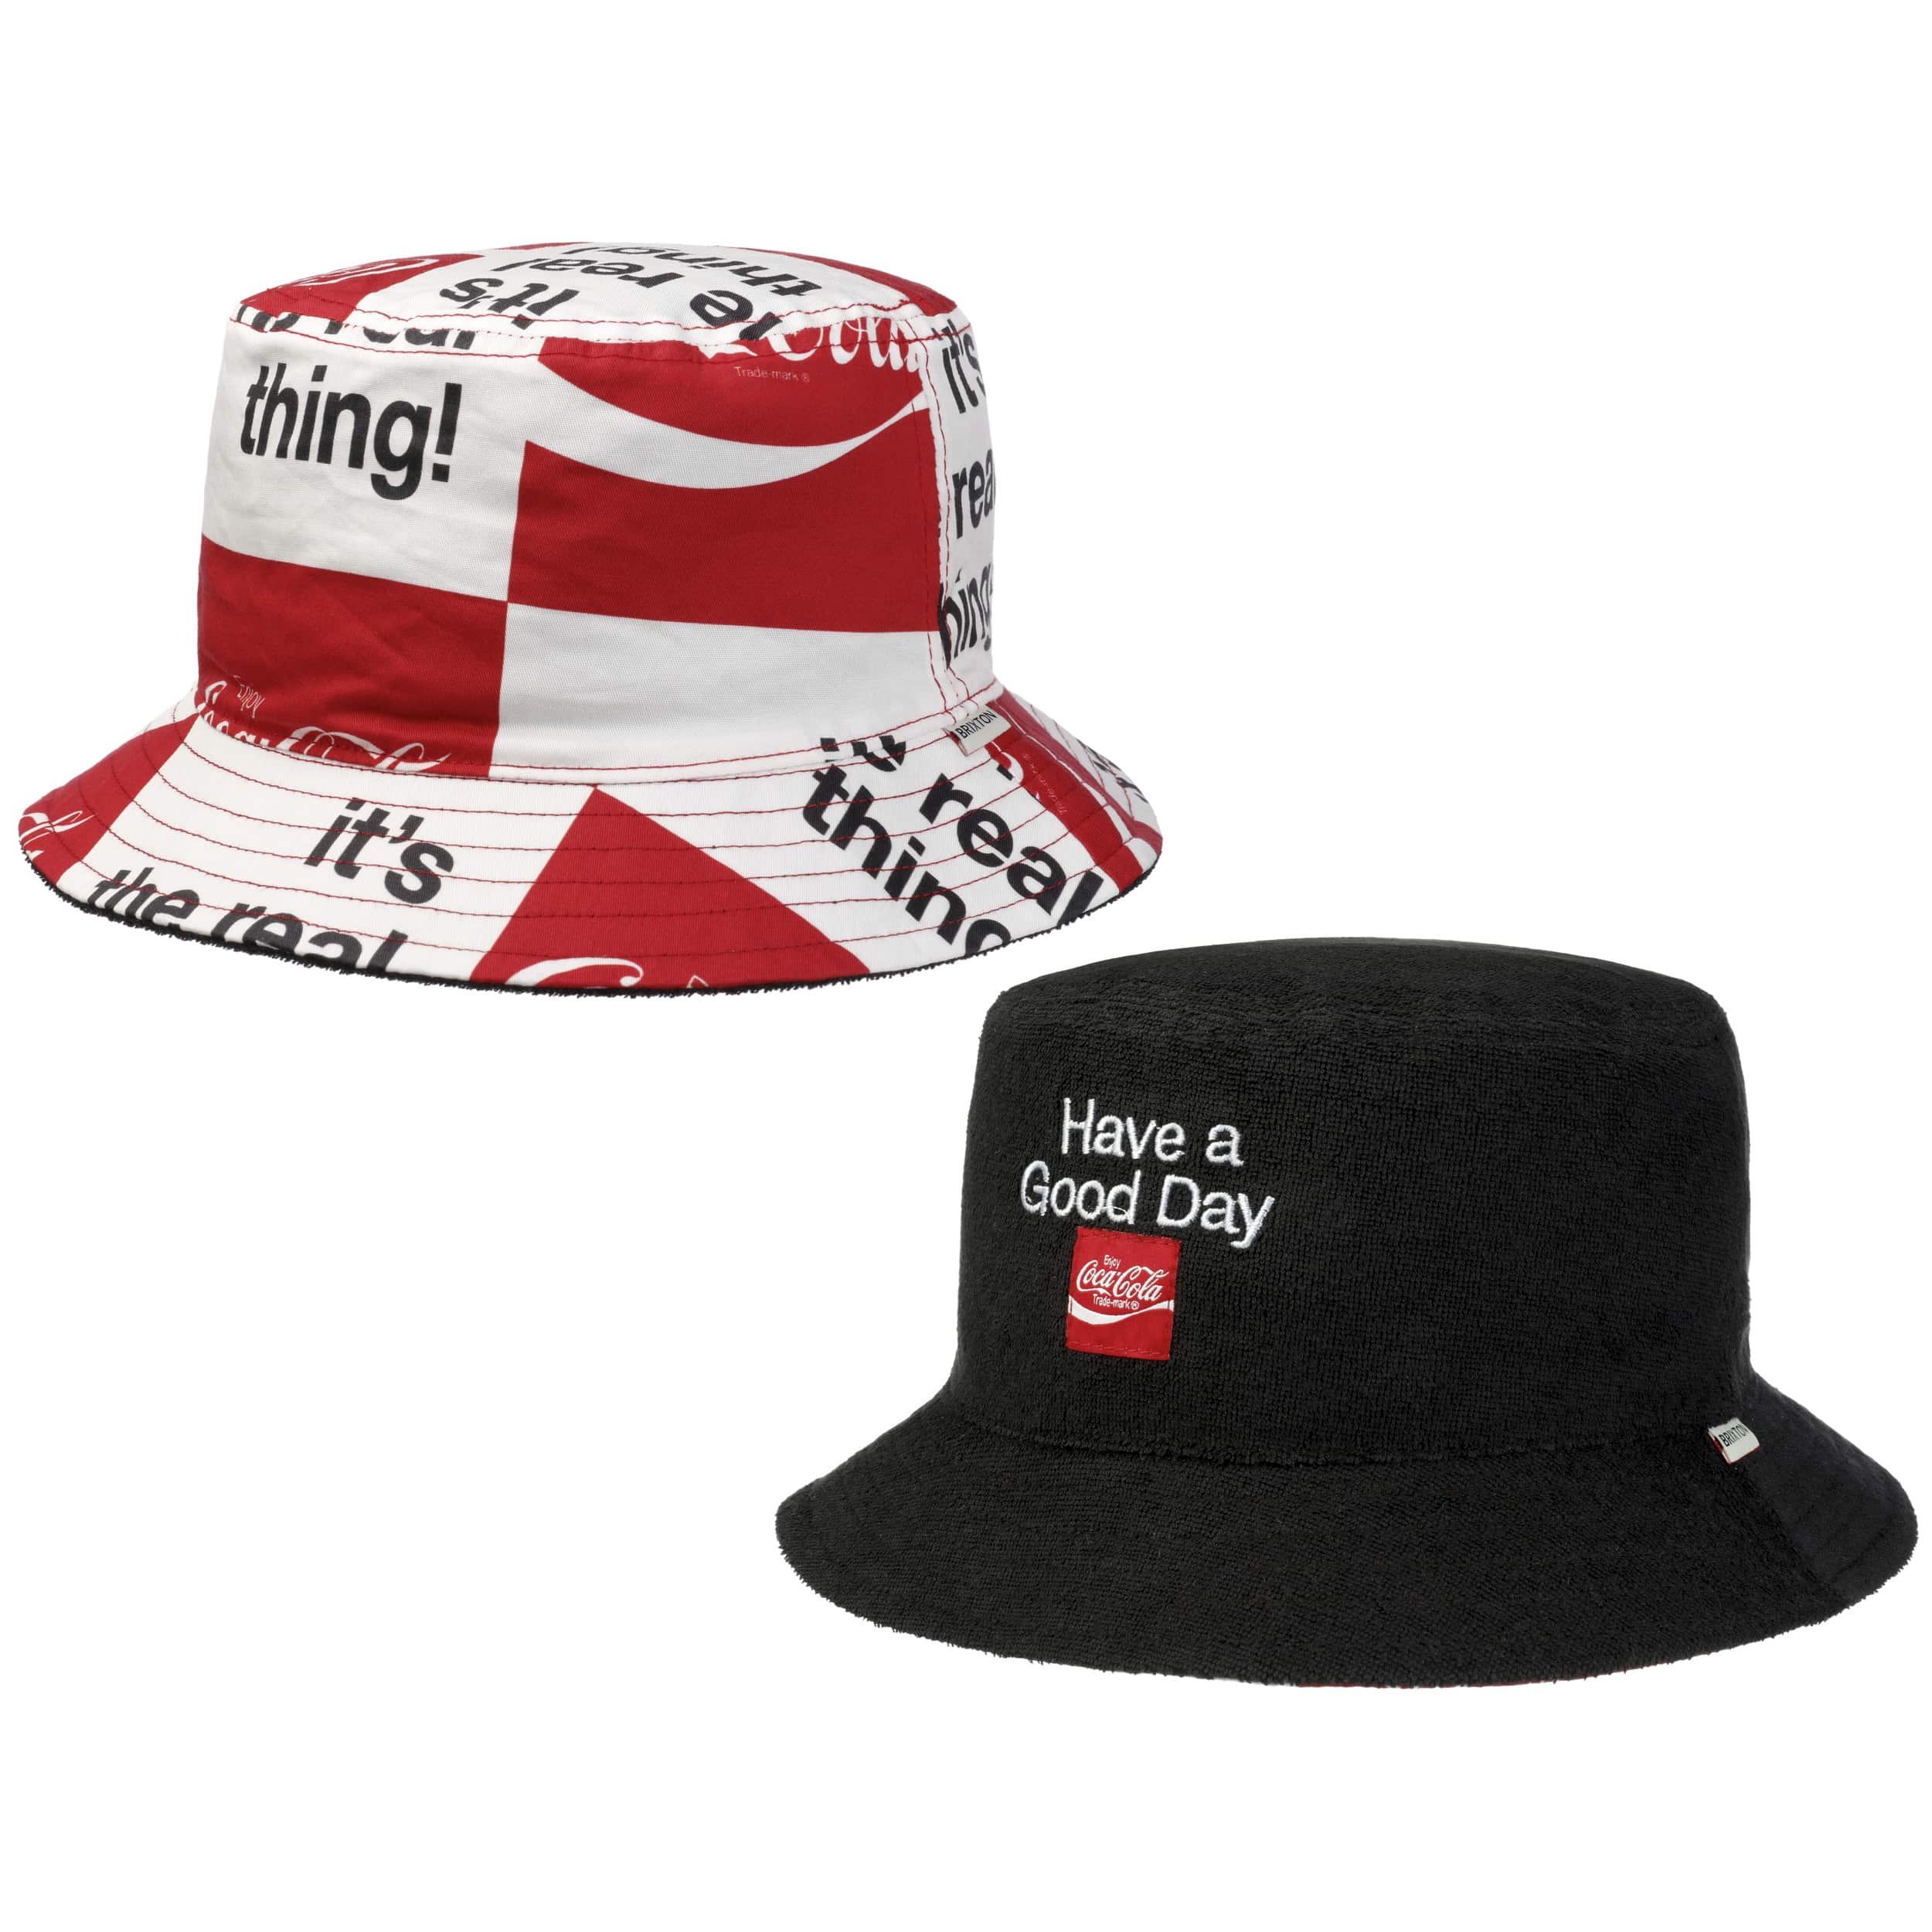 € Reversible Hat by Brixton Good Coca-Cola Day - 62,95